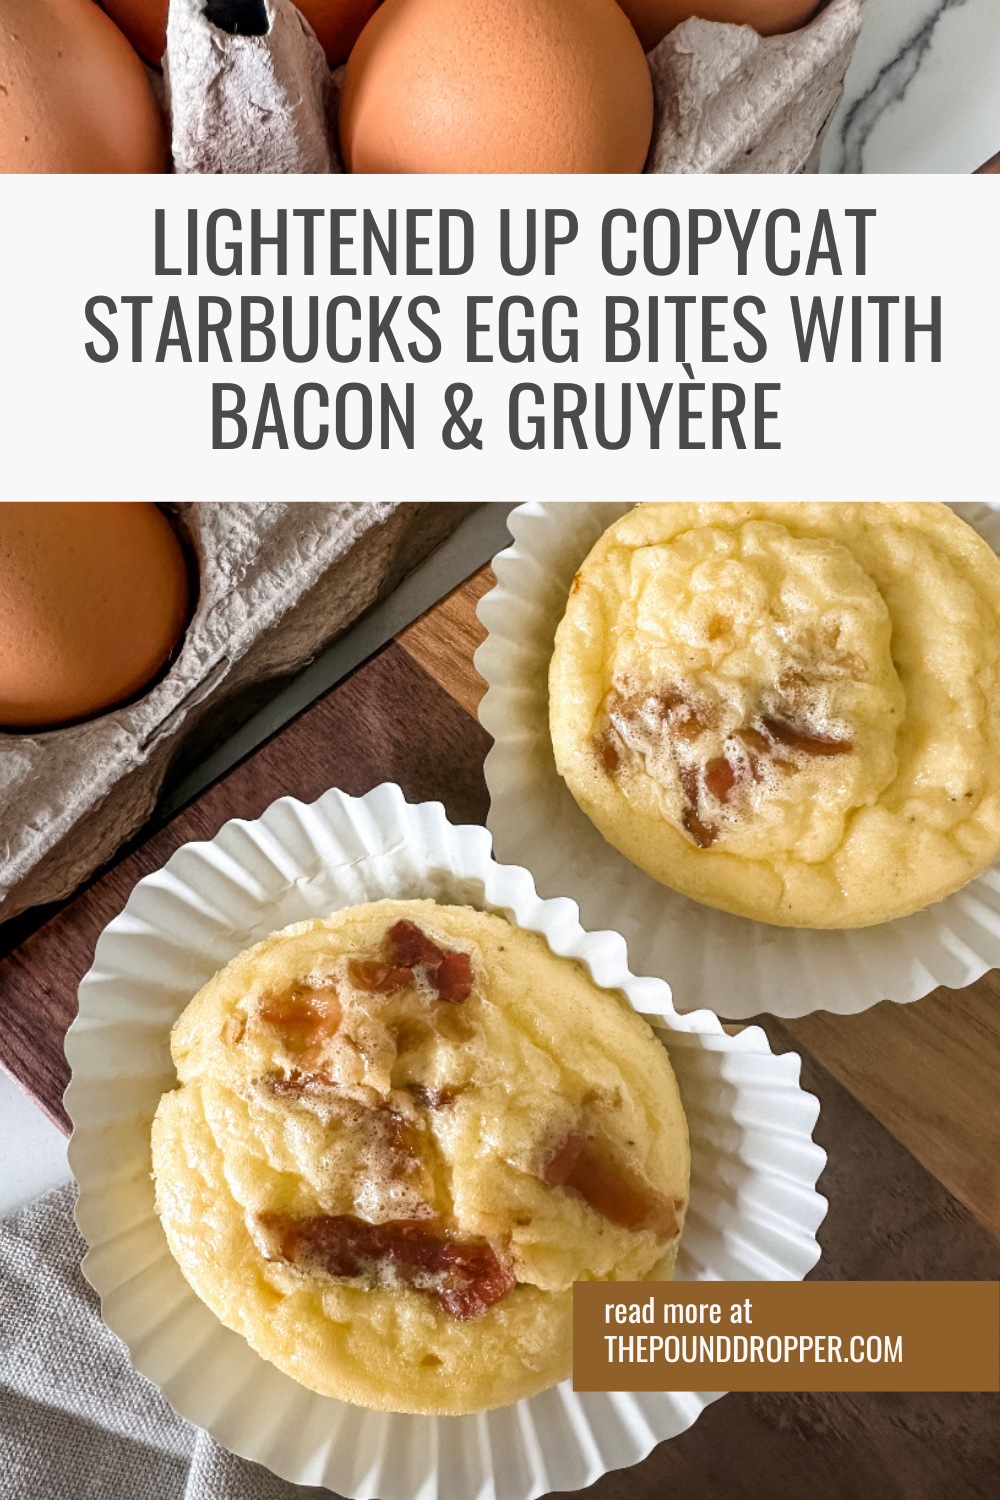 You can make these Lightened Up Copycat Starbucks Egg Bites with Bacon & Gruyère at home! These egg bites are pretty darn close to the ones from Starbucks, and you can make them at home for a lot less money, calories, and fat than theirs! These make for the perfect grab-and-go breakfast-and will be on your meal prep rotation for years to come! via @pounddropper